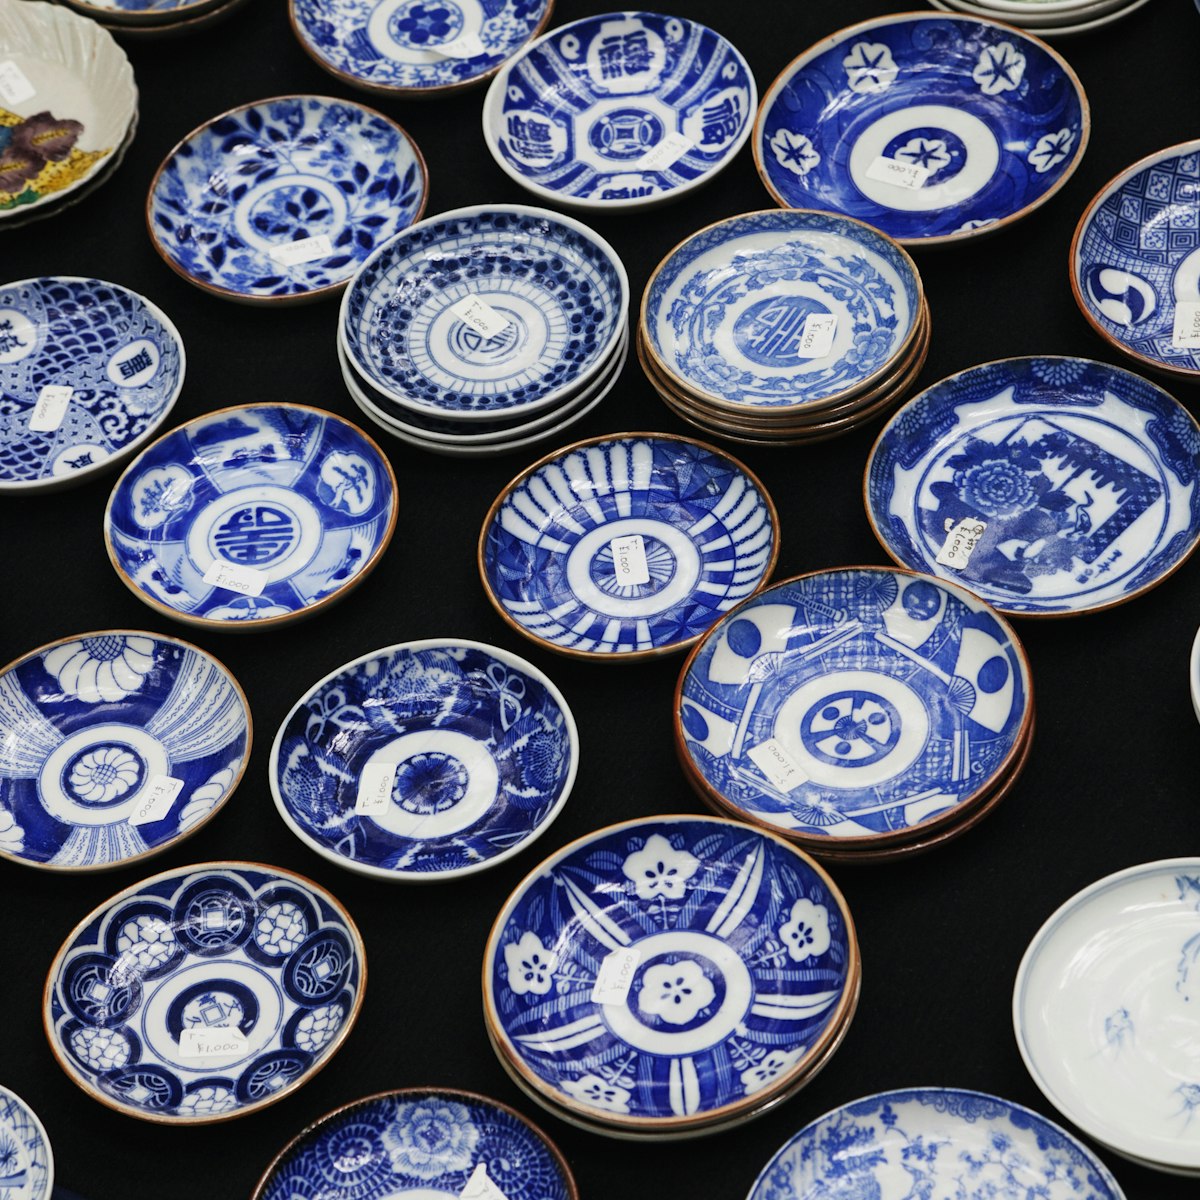 Pottery Display at the Oedo Monthly Antique Market at the Tokyo International Forum Building, Japan, Yurakucho,